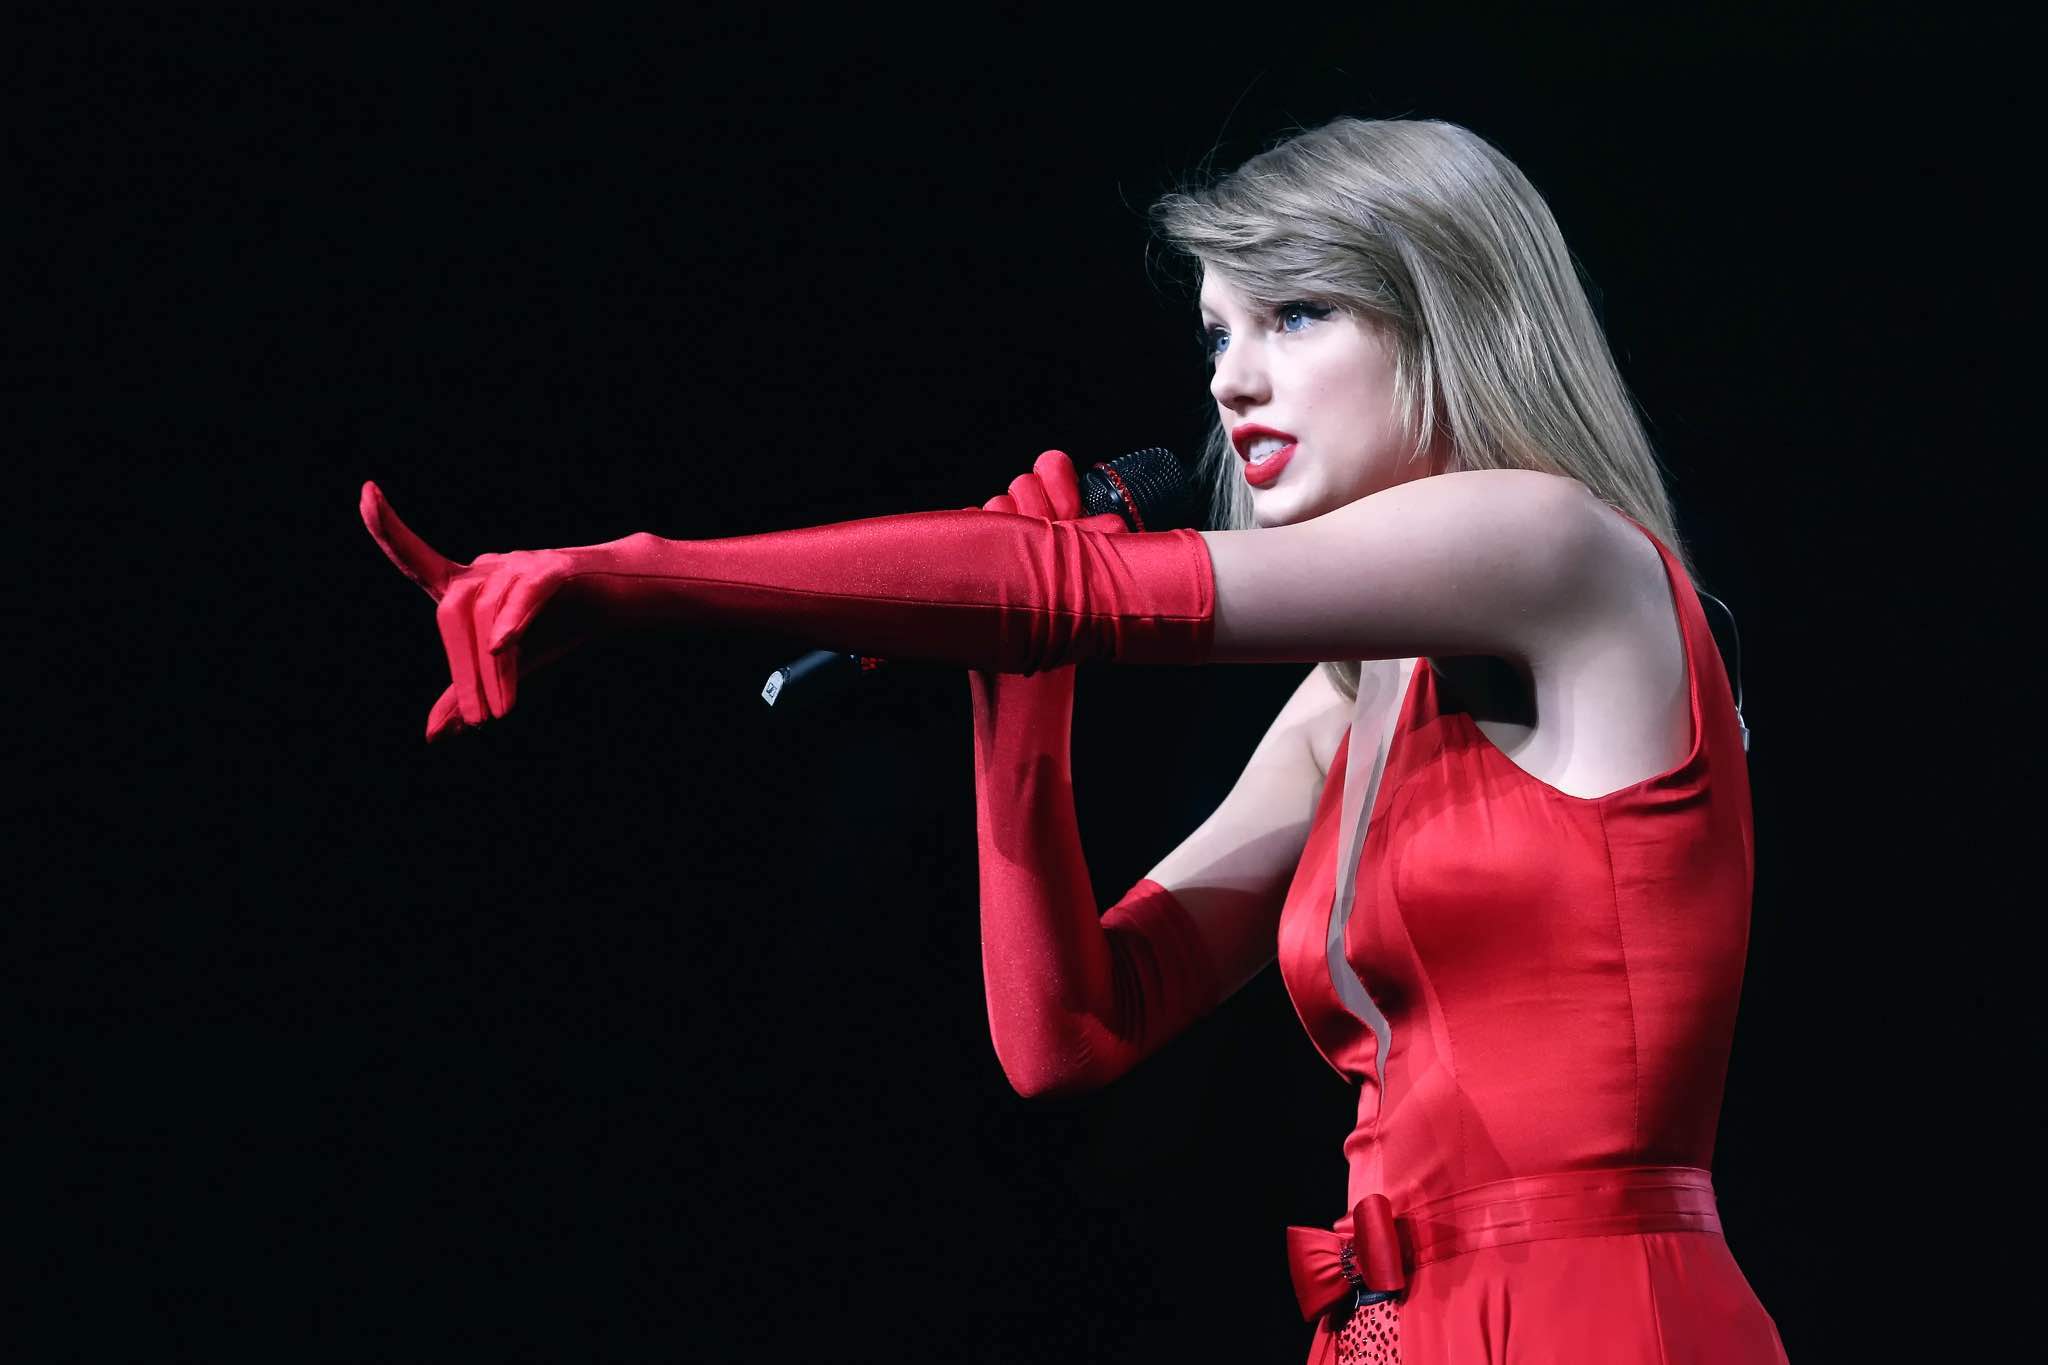 a woman in a red dress holding a microphone